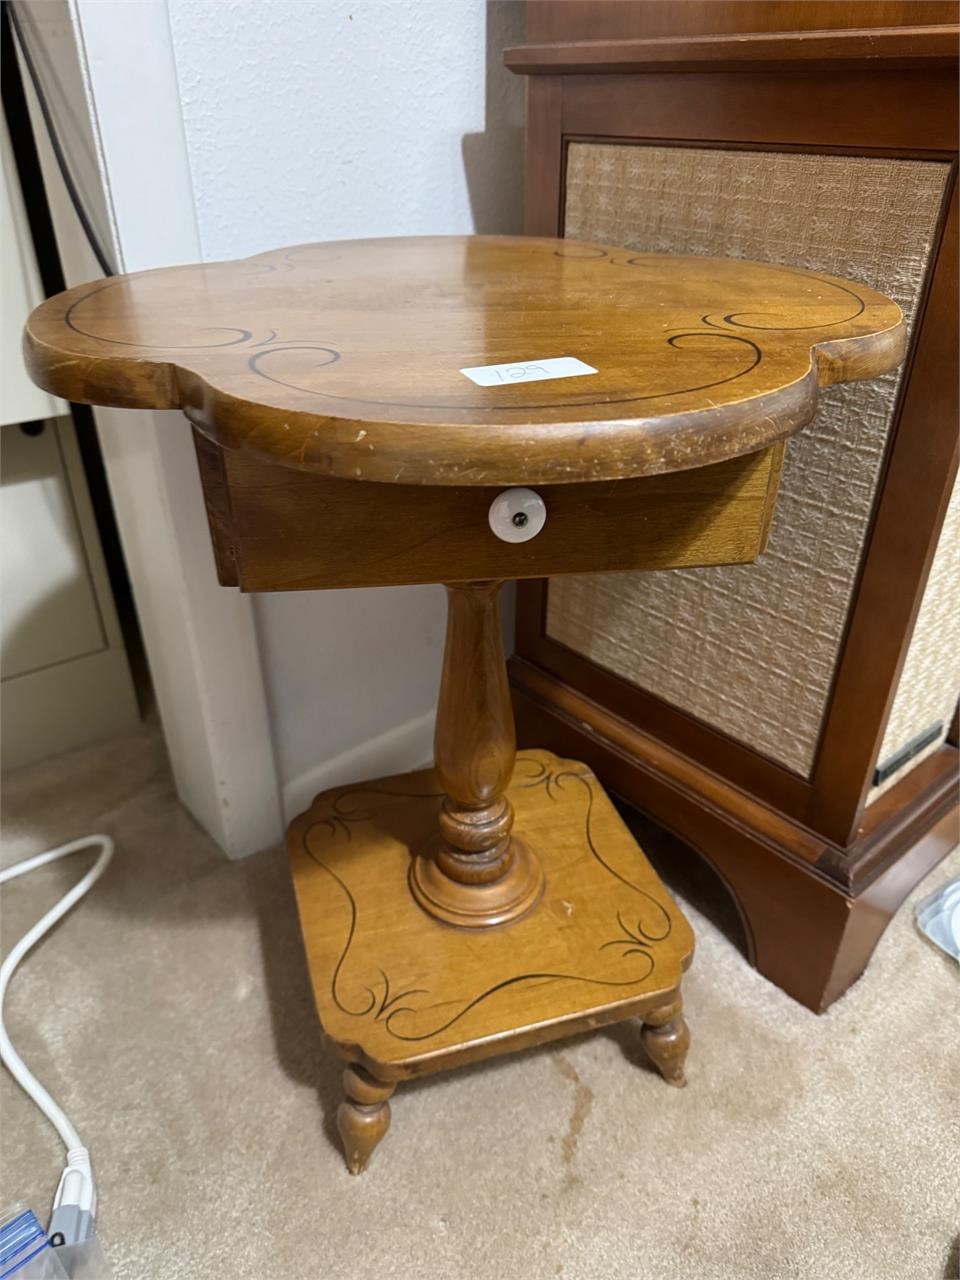 CLOVER LEAF TABLE WITH DRAWER 22"T X 18" X 18"